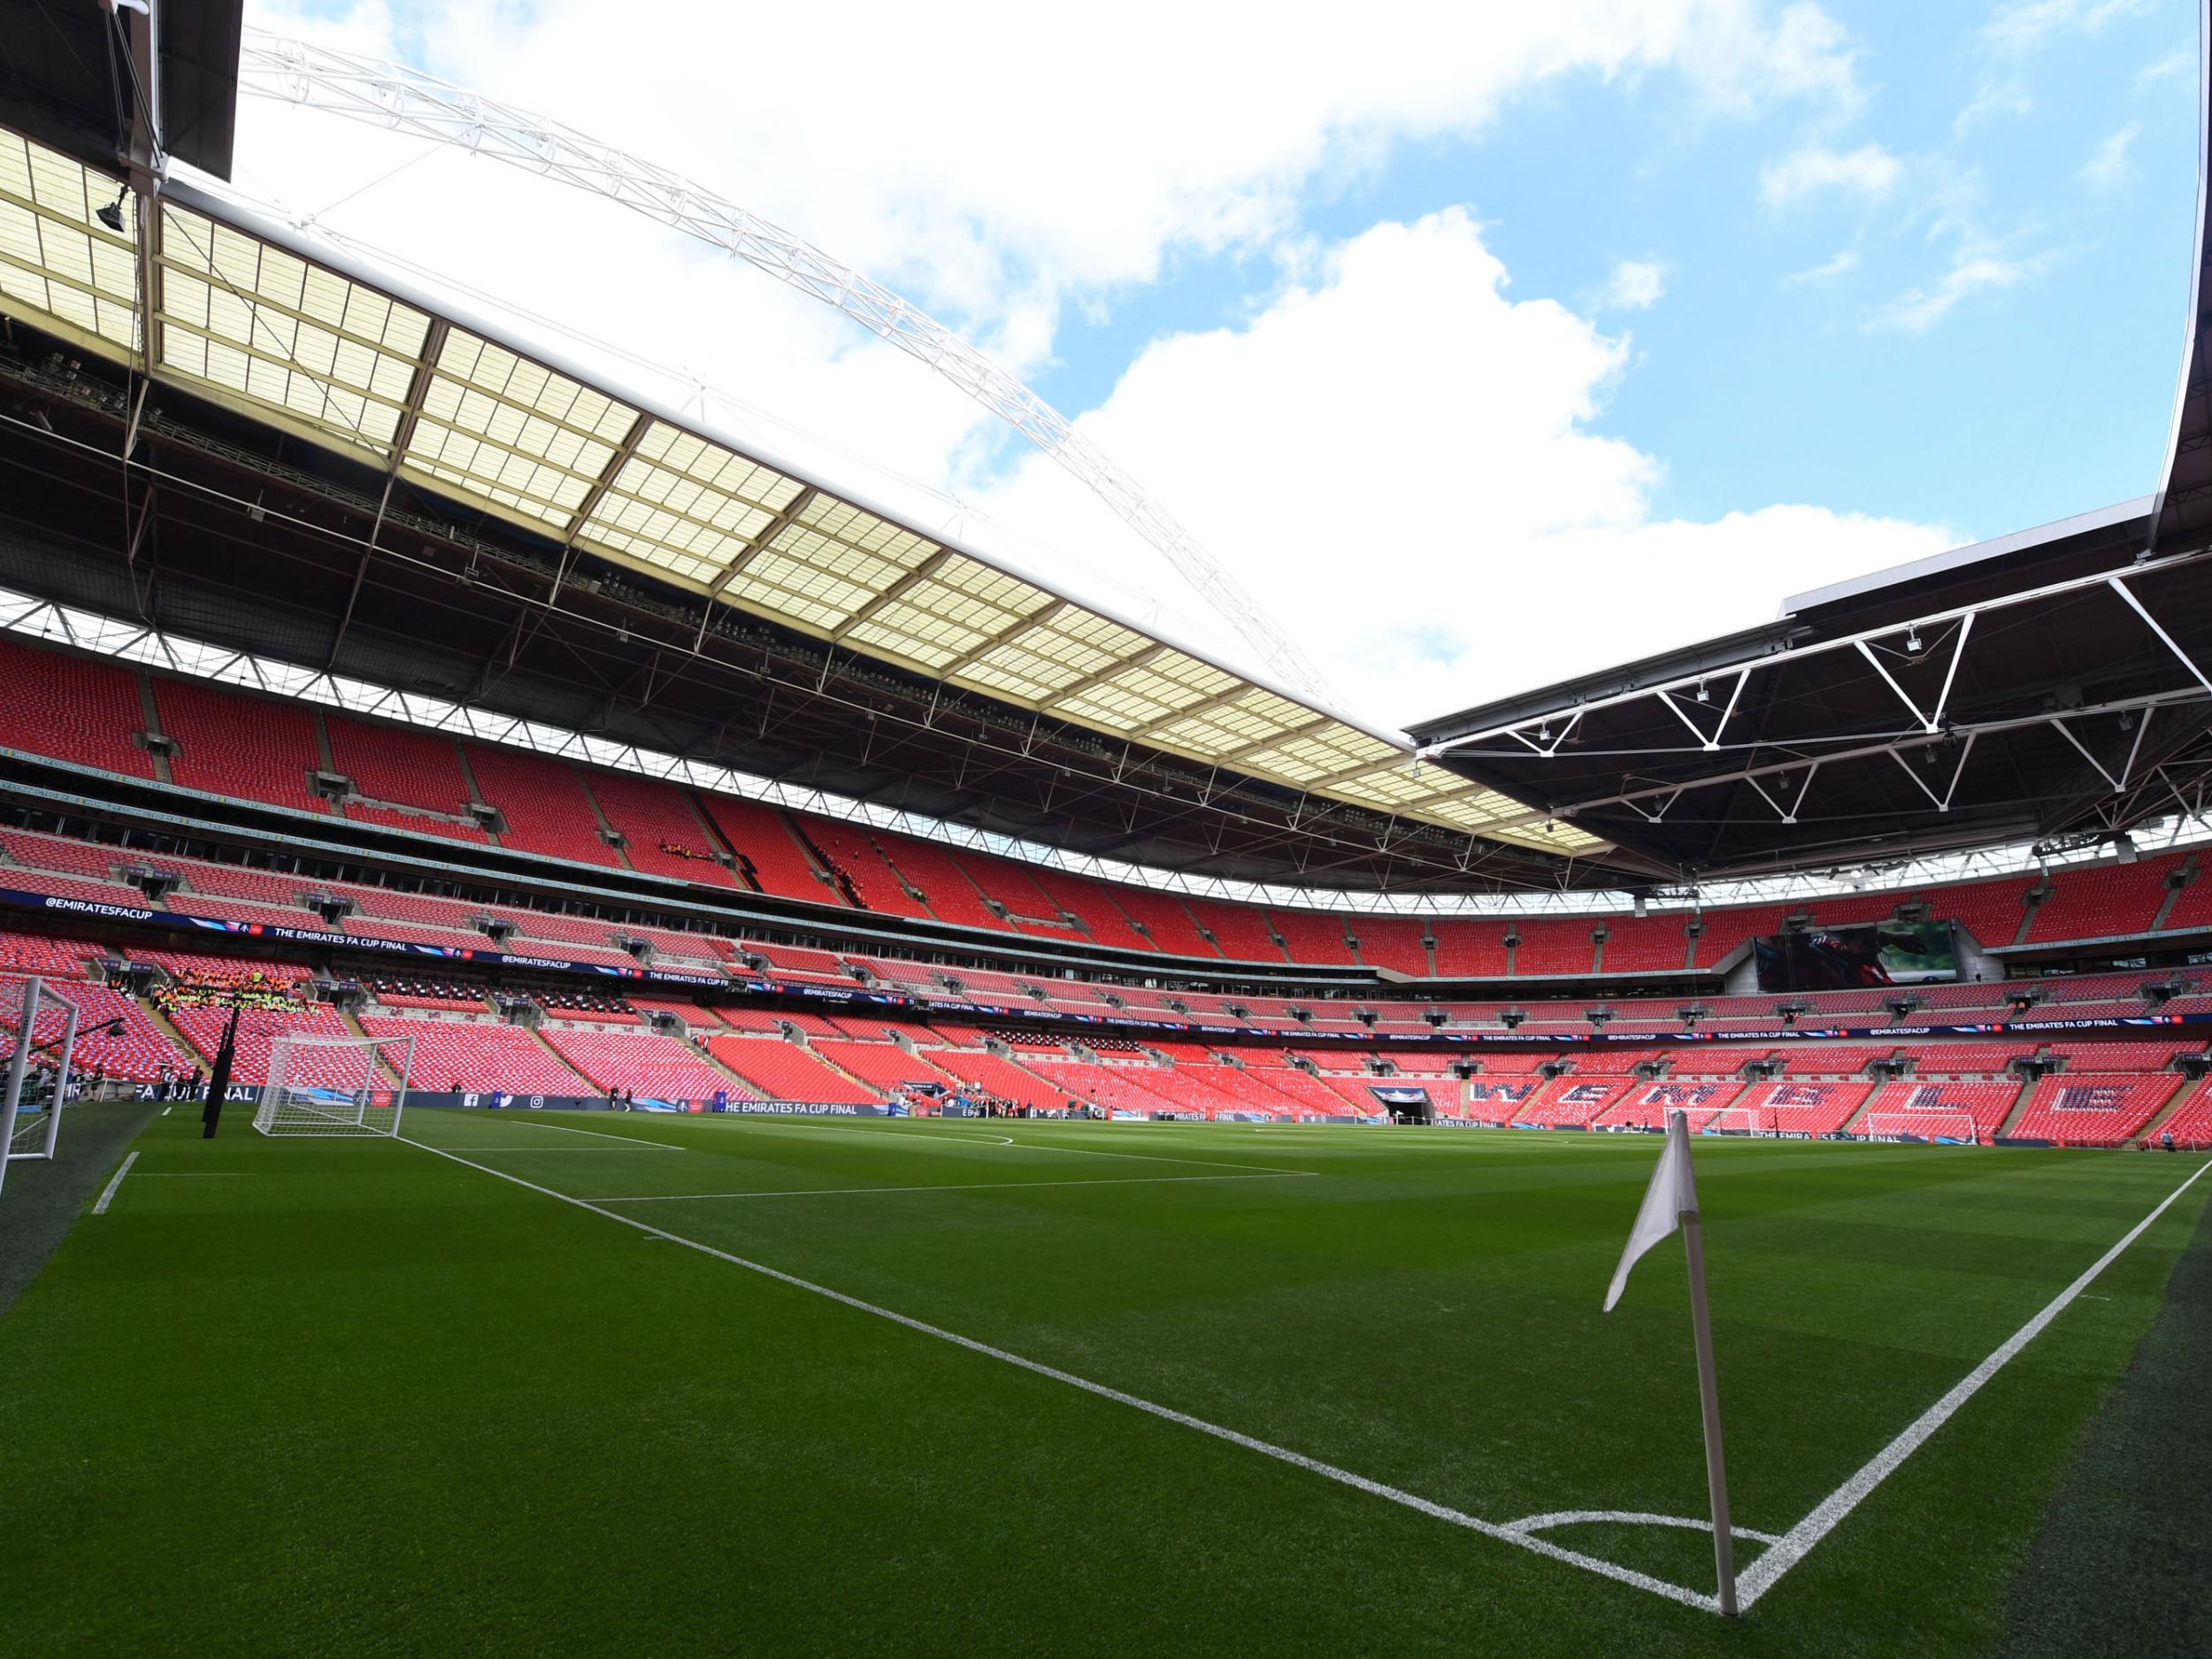 Wembley could find itself with a new roof if Khan's purchase goes through